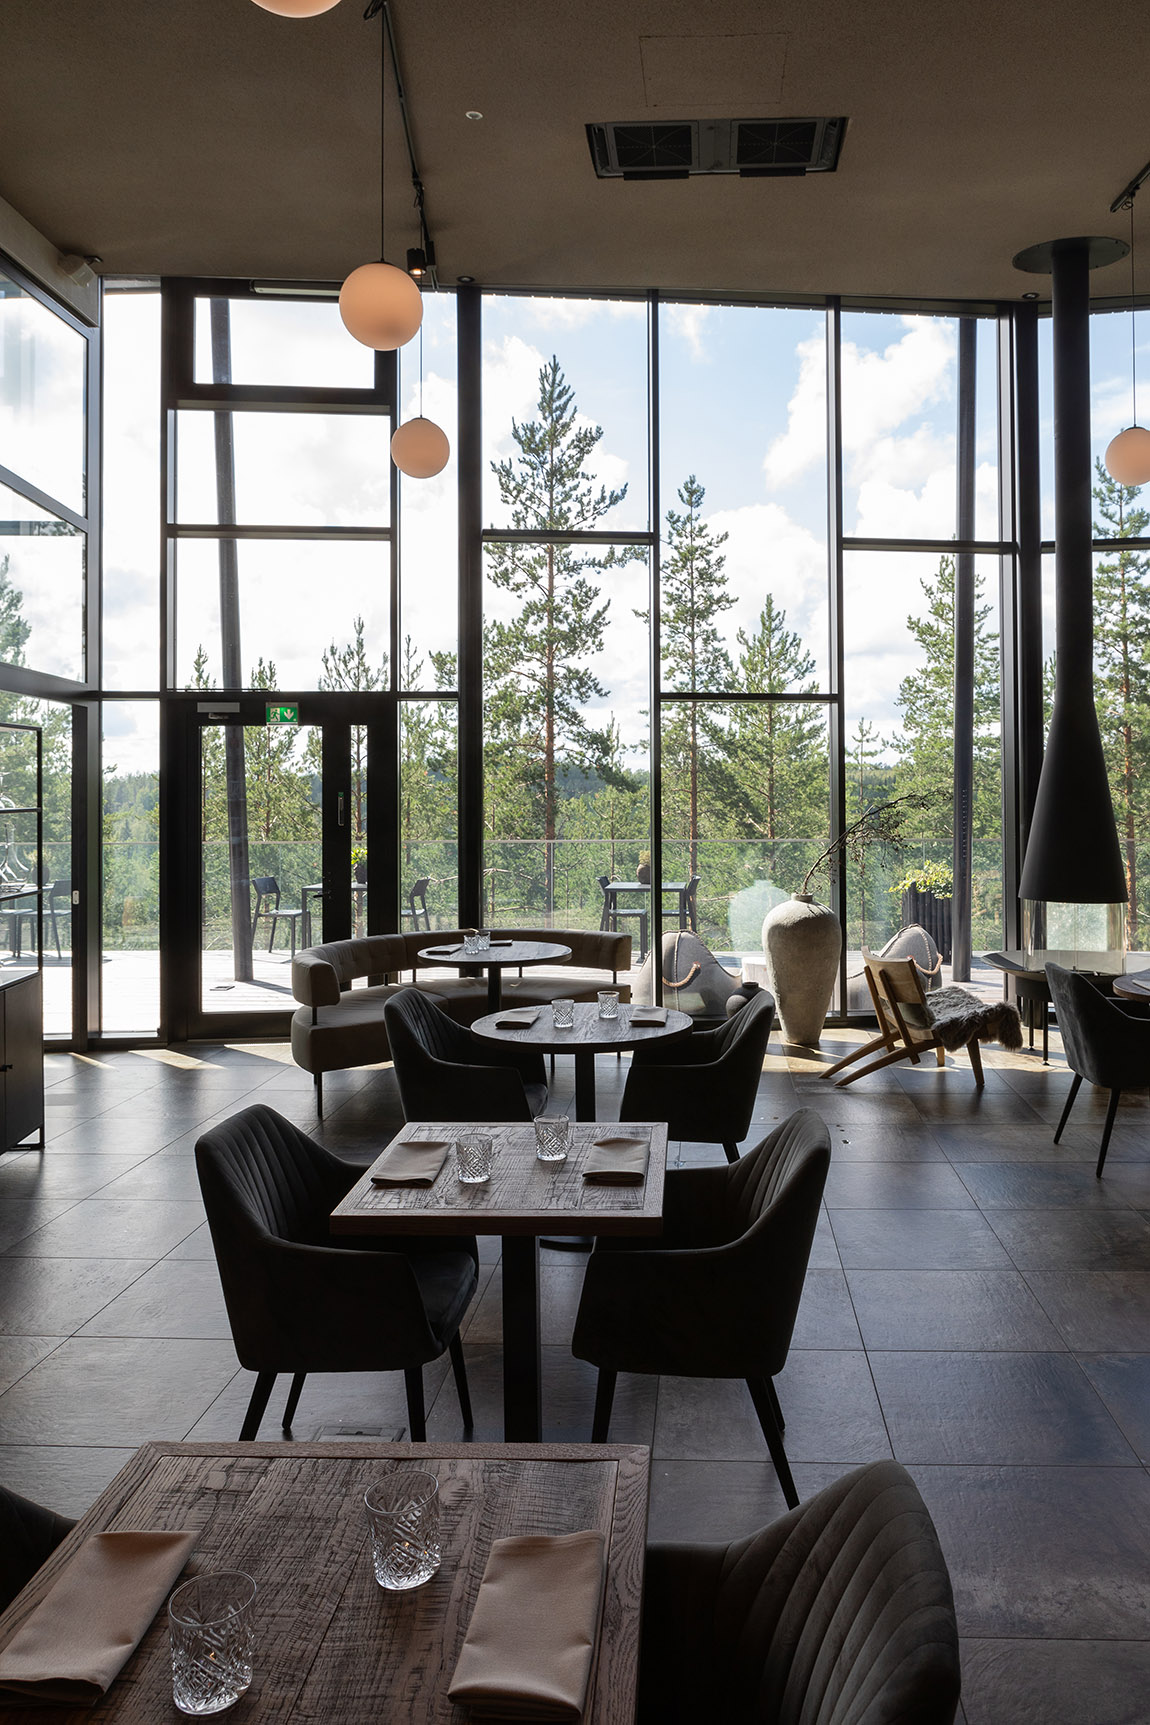 Restaurant Solitary: Savouring Saimaa’s bounty – a culinary symphony of local flavours